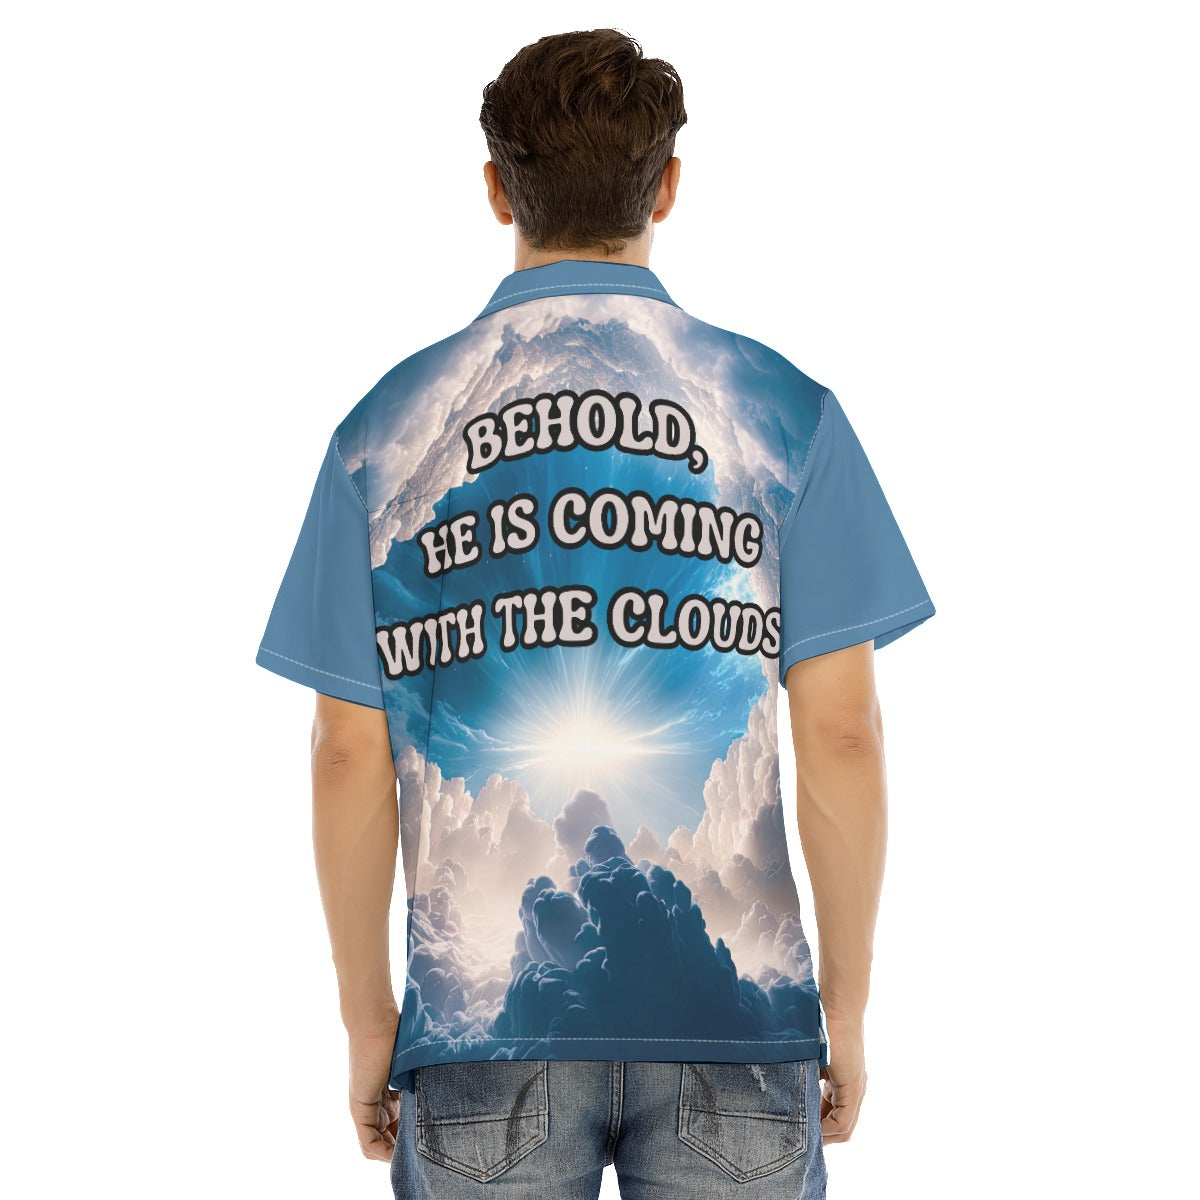 Coming With The Clouds Button Up Short Sleeves Shirt